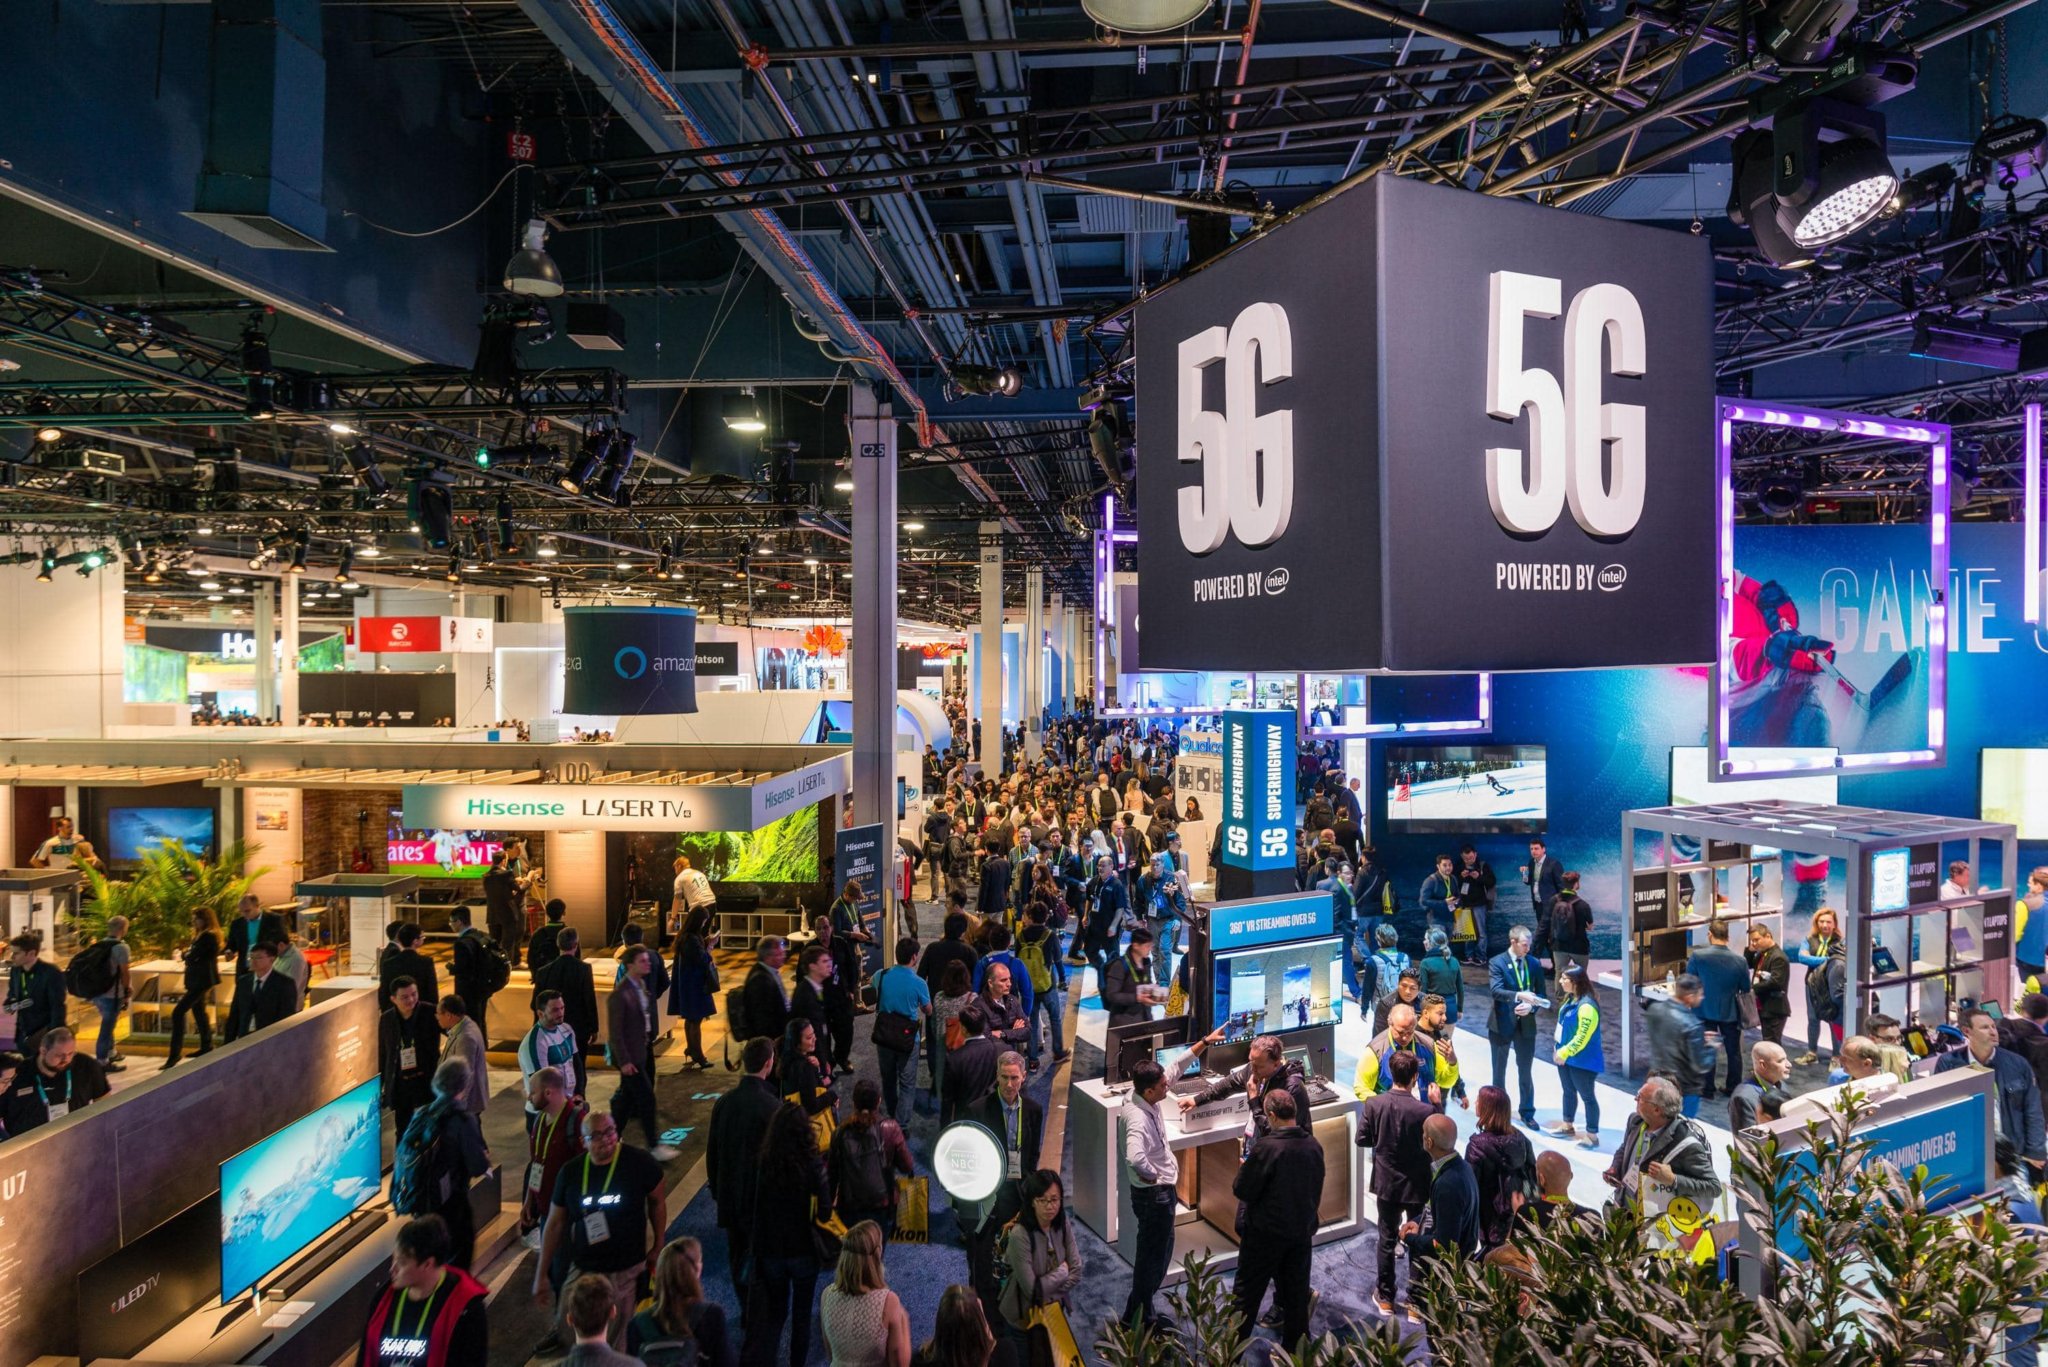 CES 2022 The world’s premier electronics trade show